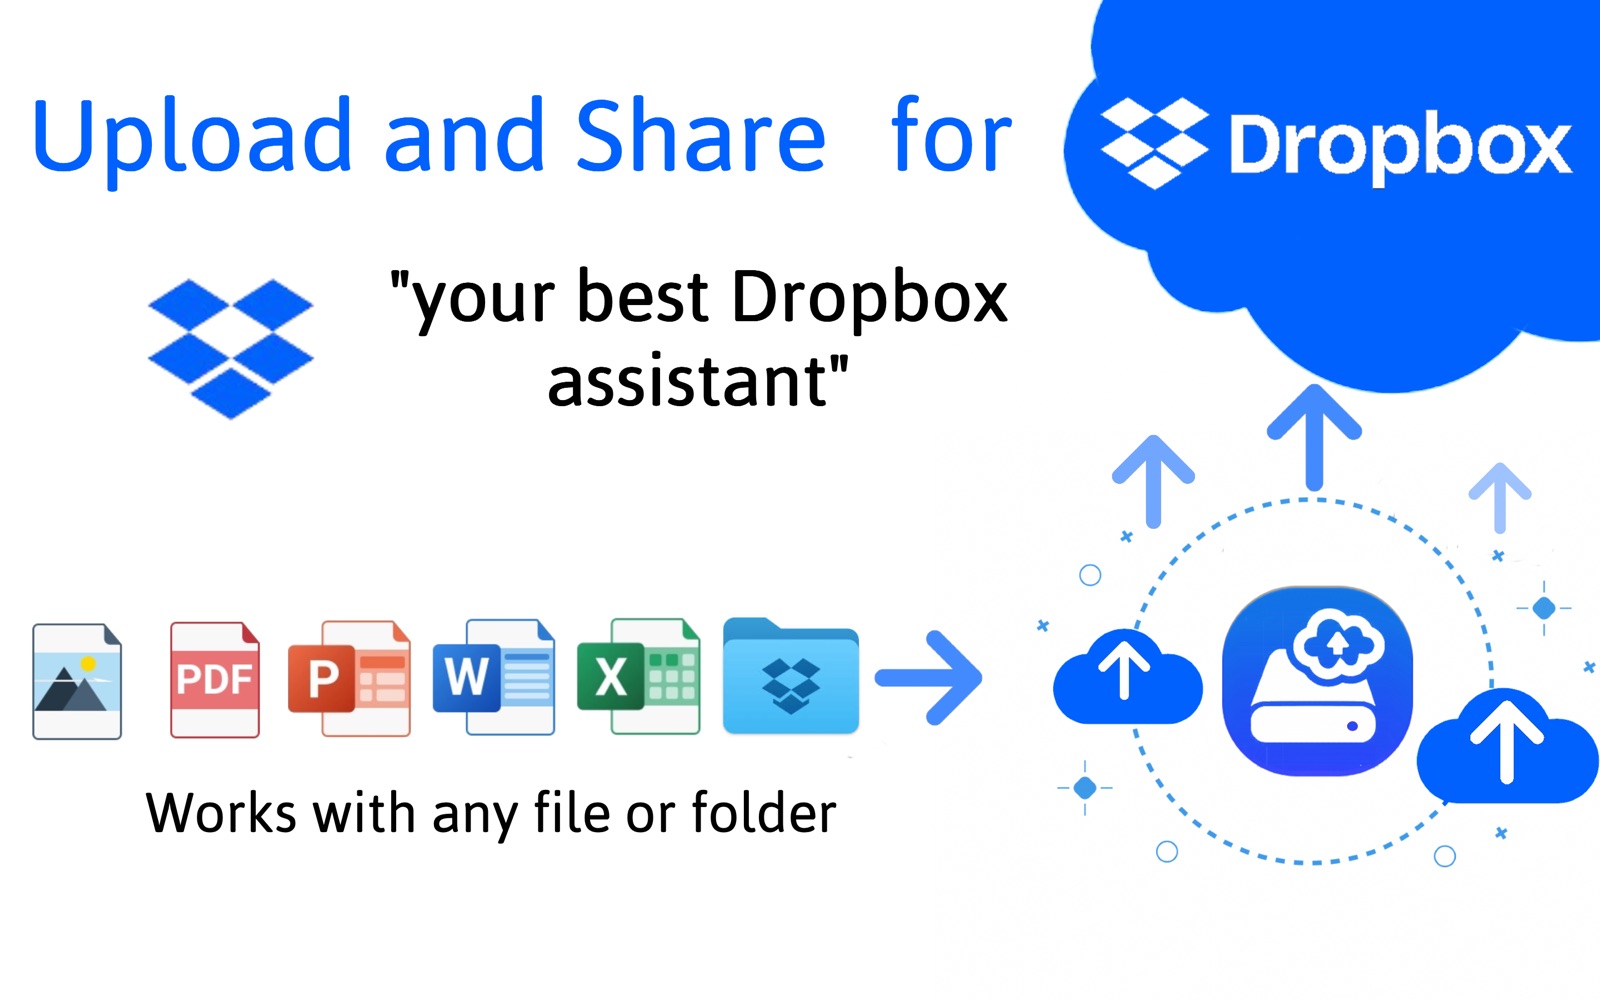 Upload and Share for Dropbox 2.1 : Main Window